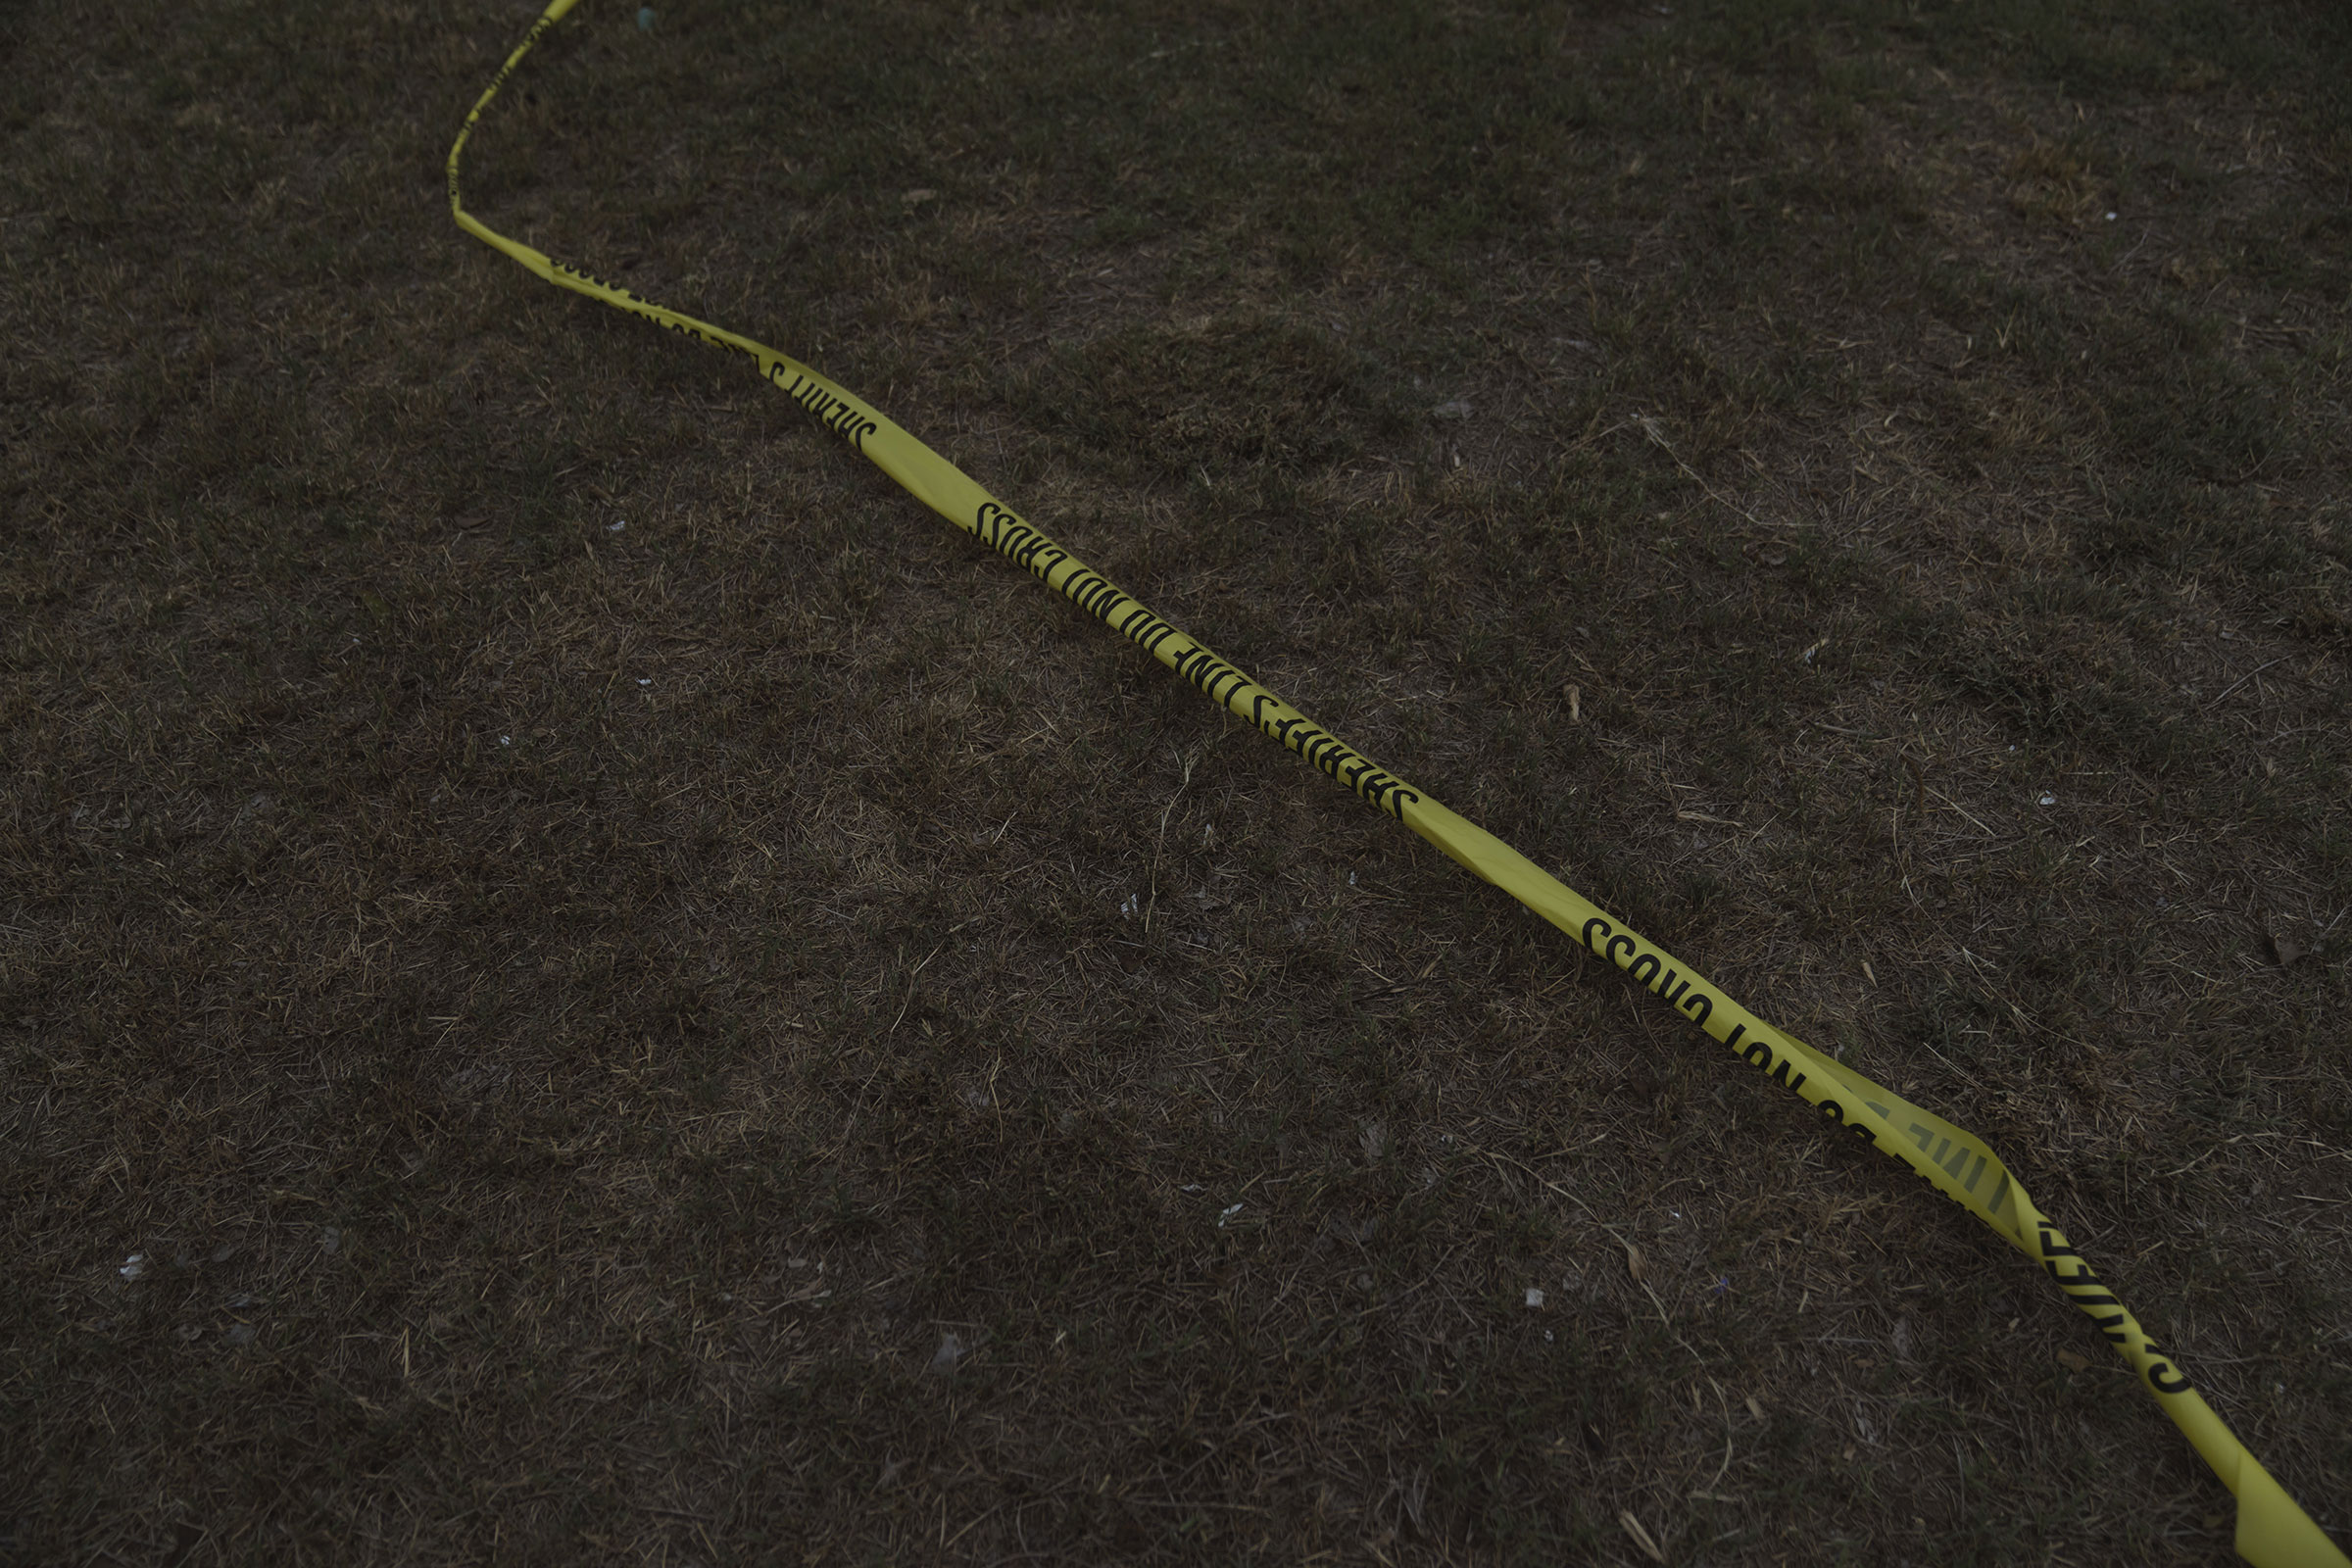 Police tape outside Robb Elementary School in Uvalde, Texas on May 24. (Eric Thayer—Bloomberg/Getty Images)